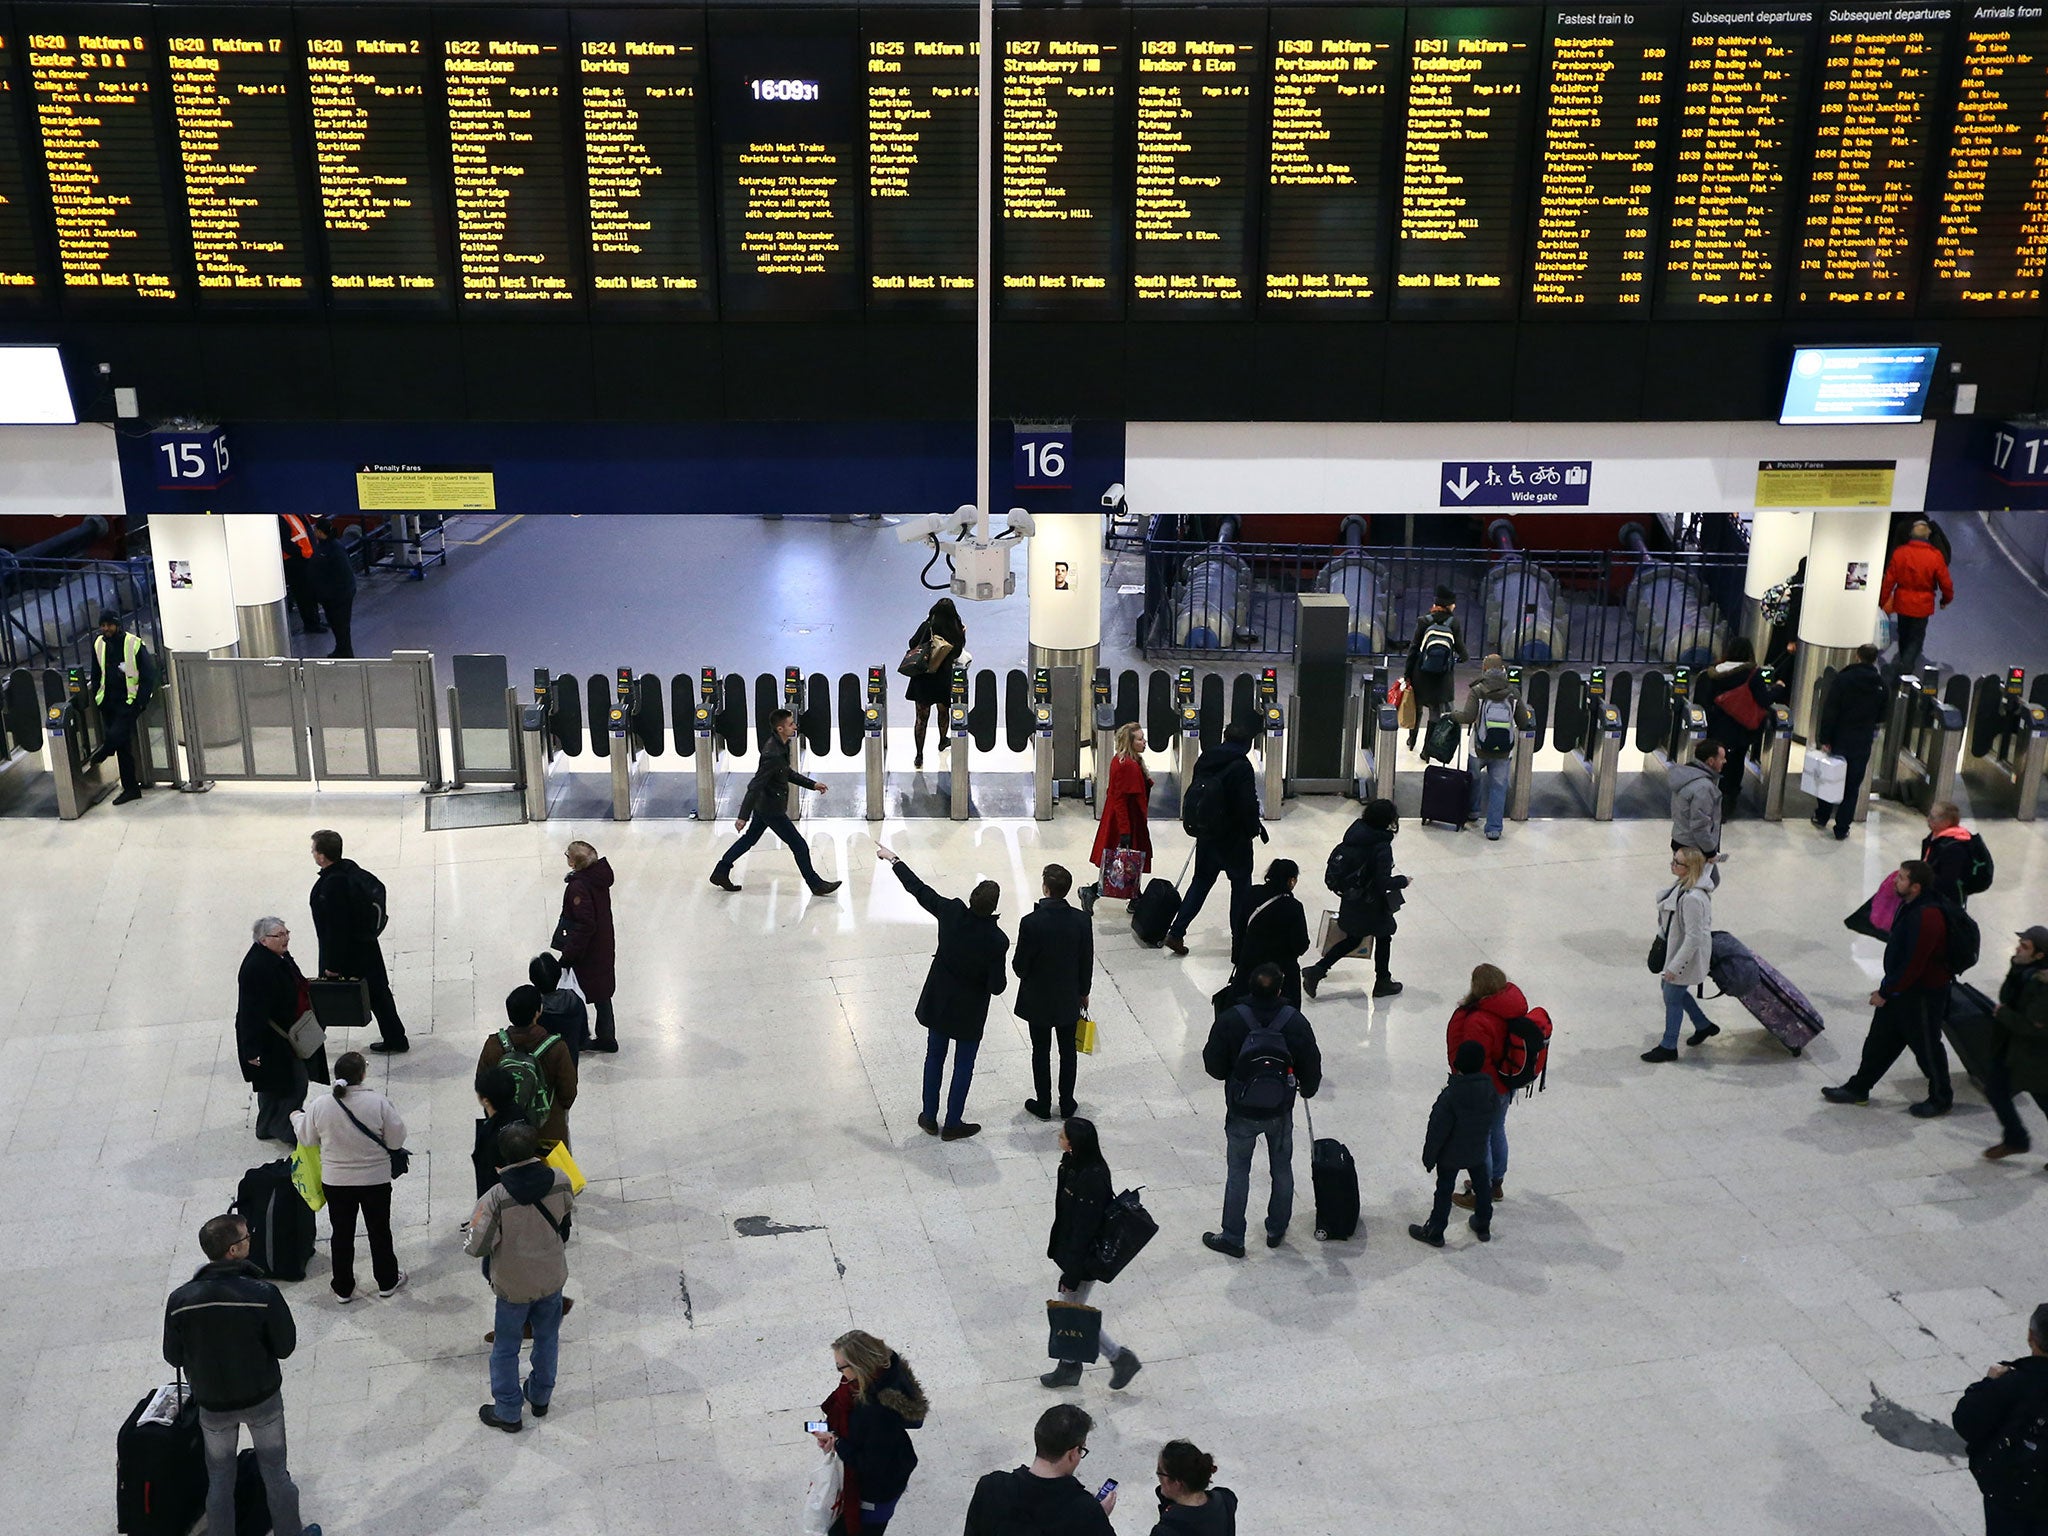 Police were called to reports that a man had been attacked near London's Waterloo station at around 2.45am